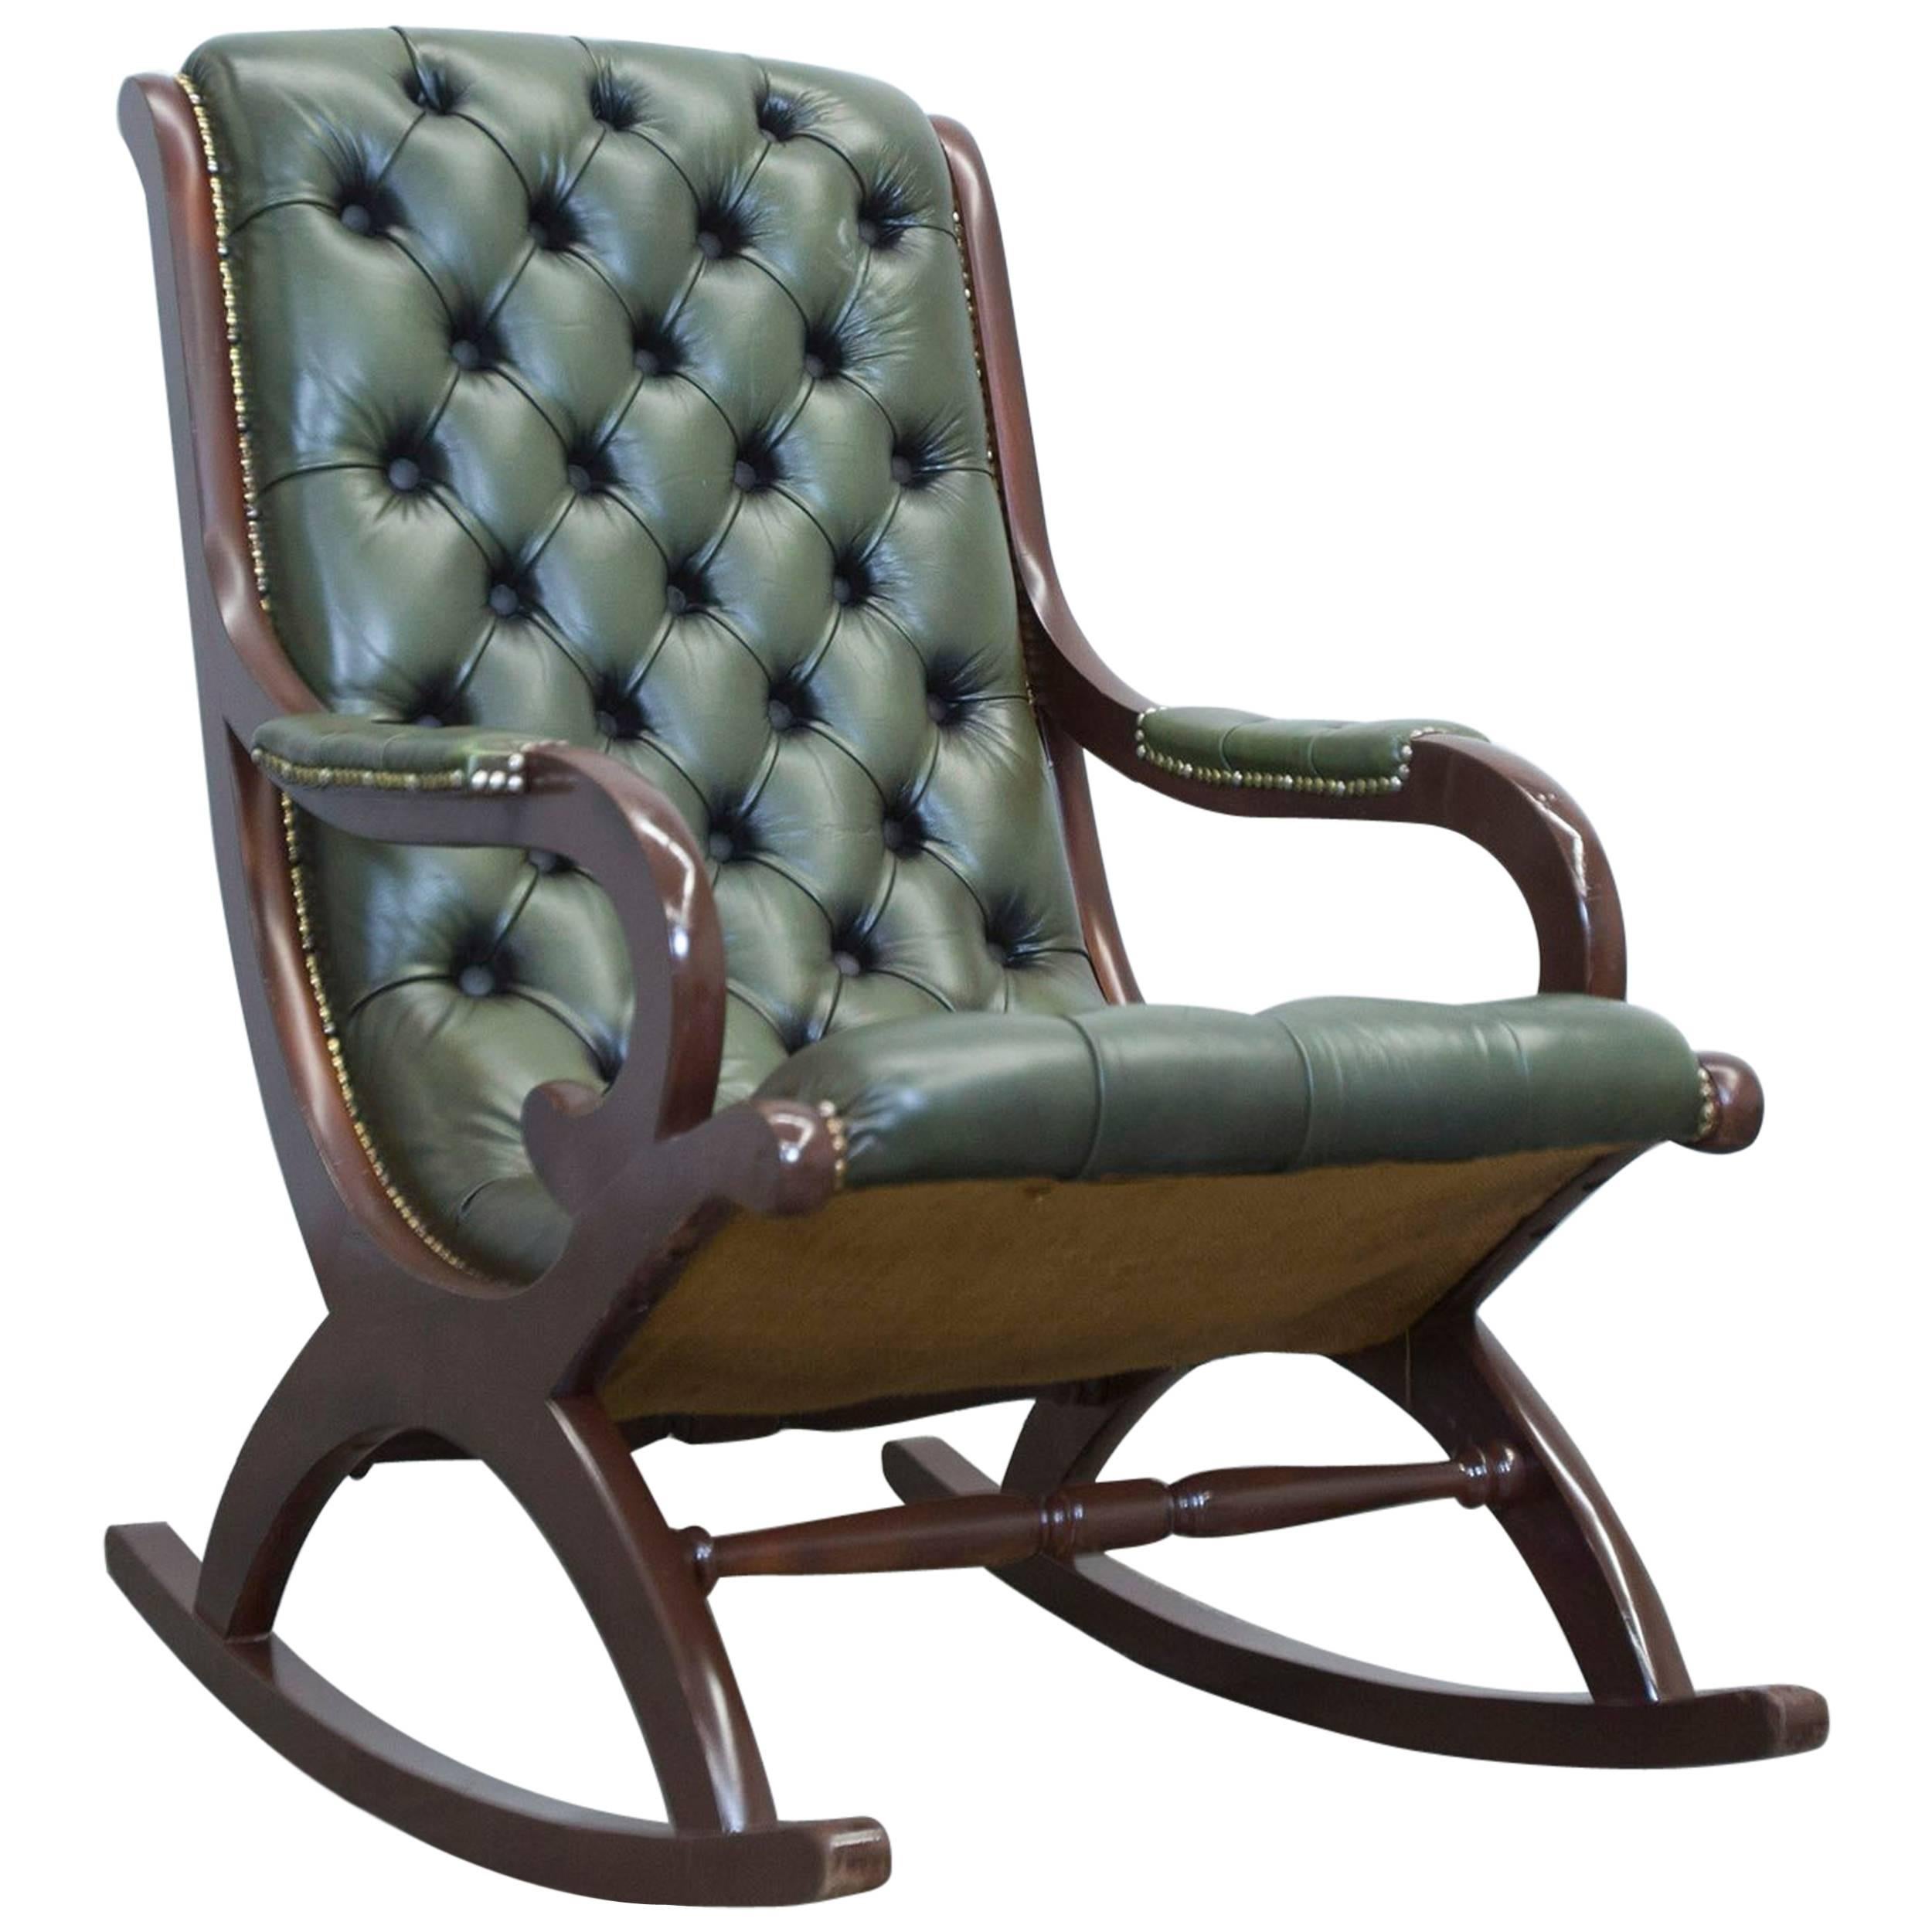 Chesterfield Leather Rockingchair Green Oneseater Chair Vintage Retro Wood